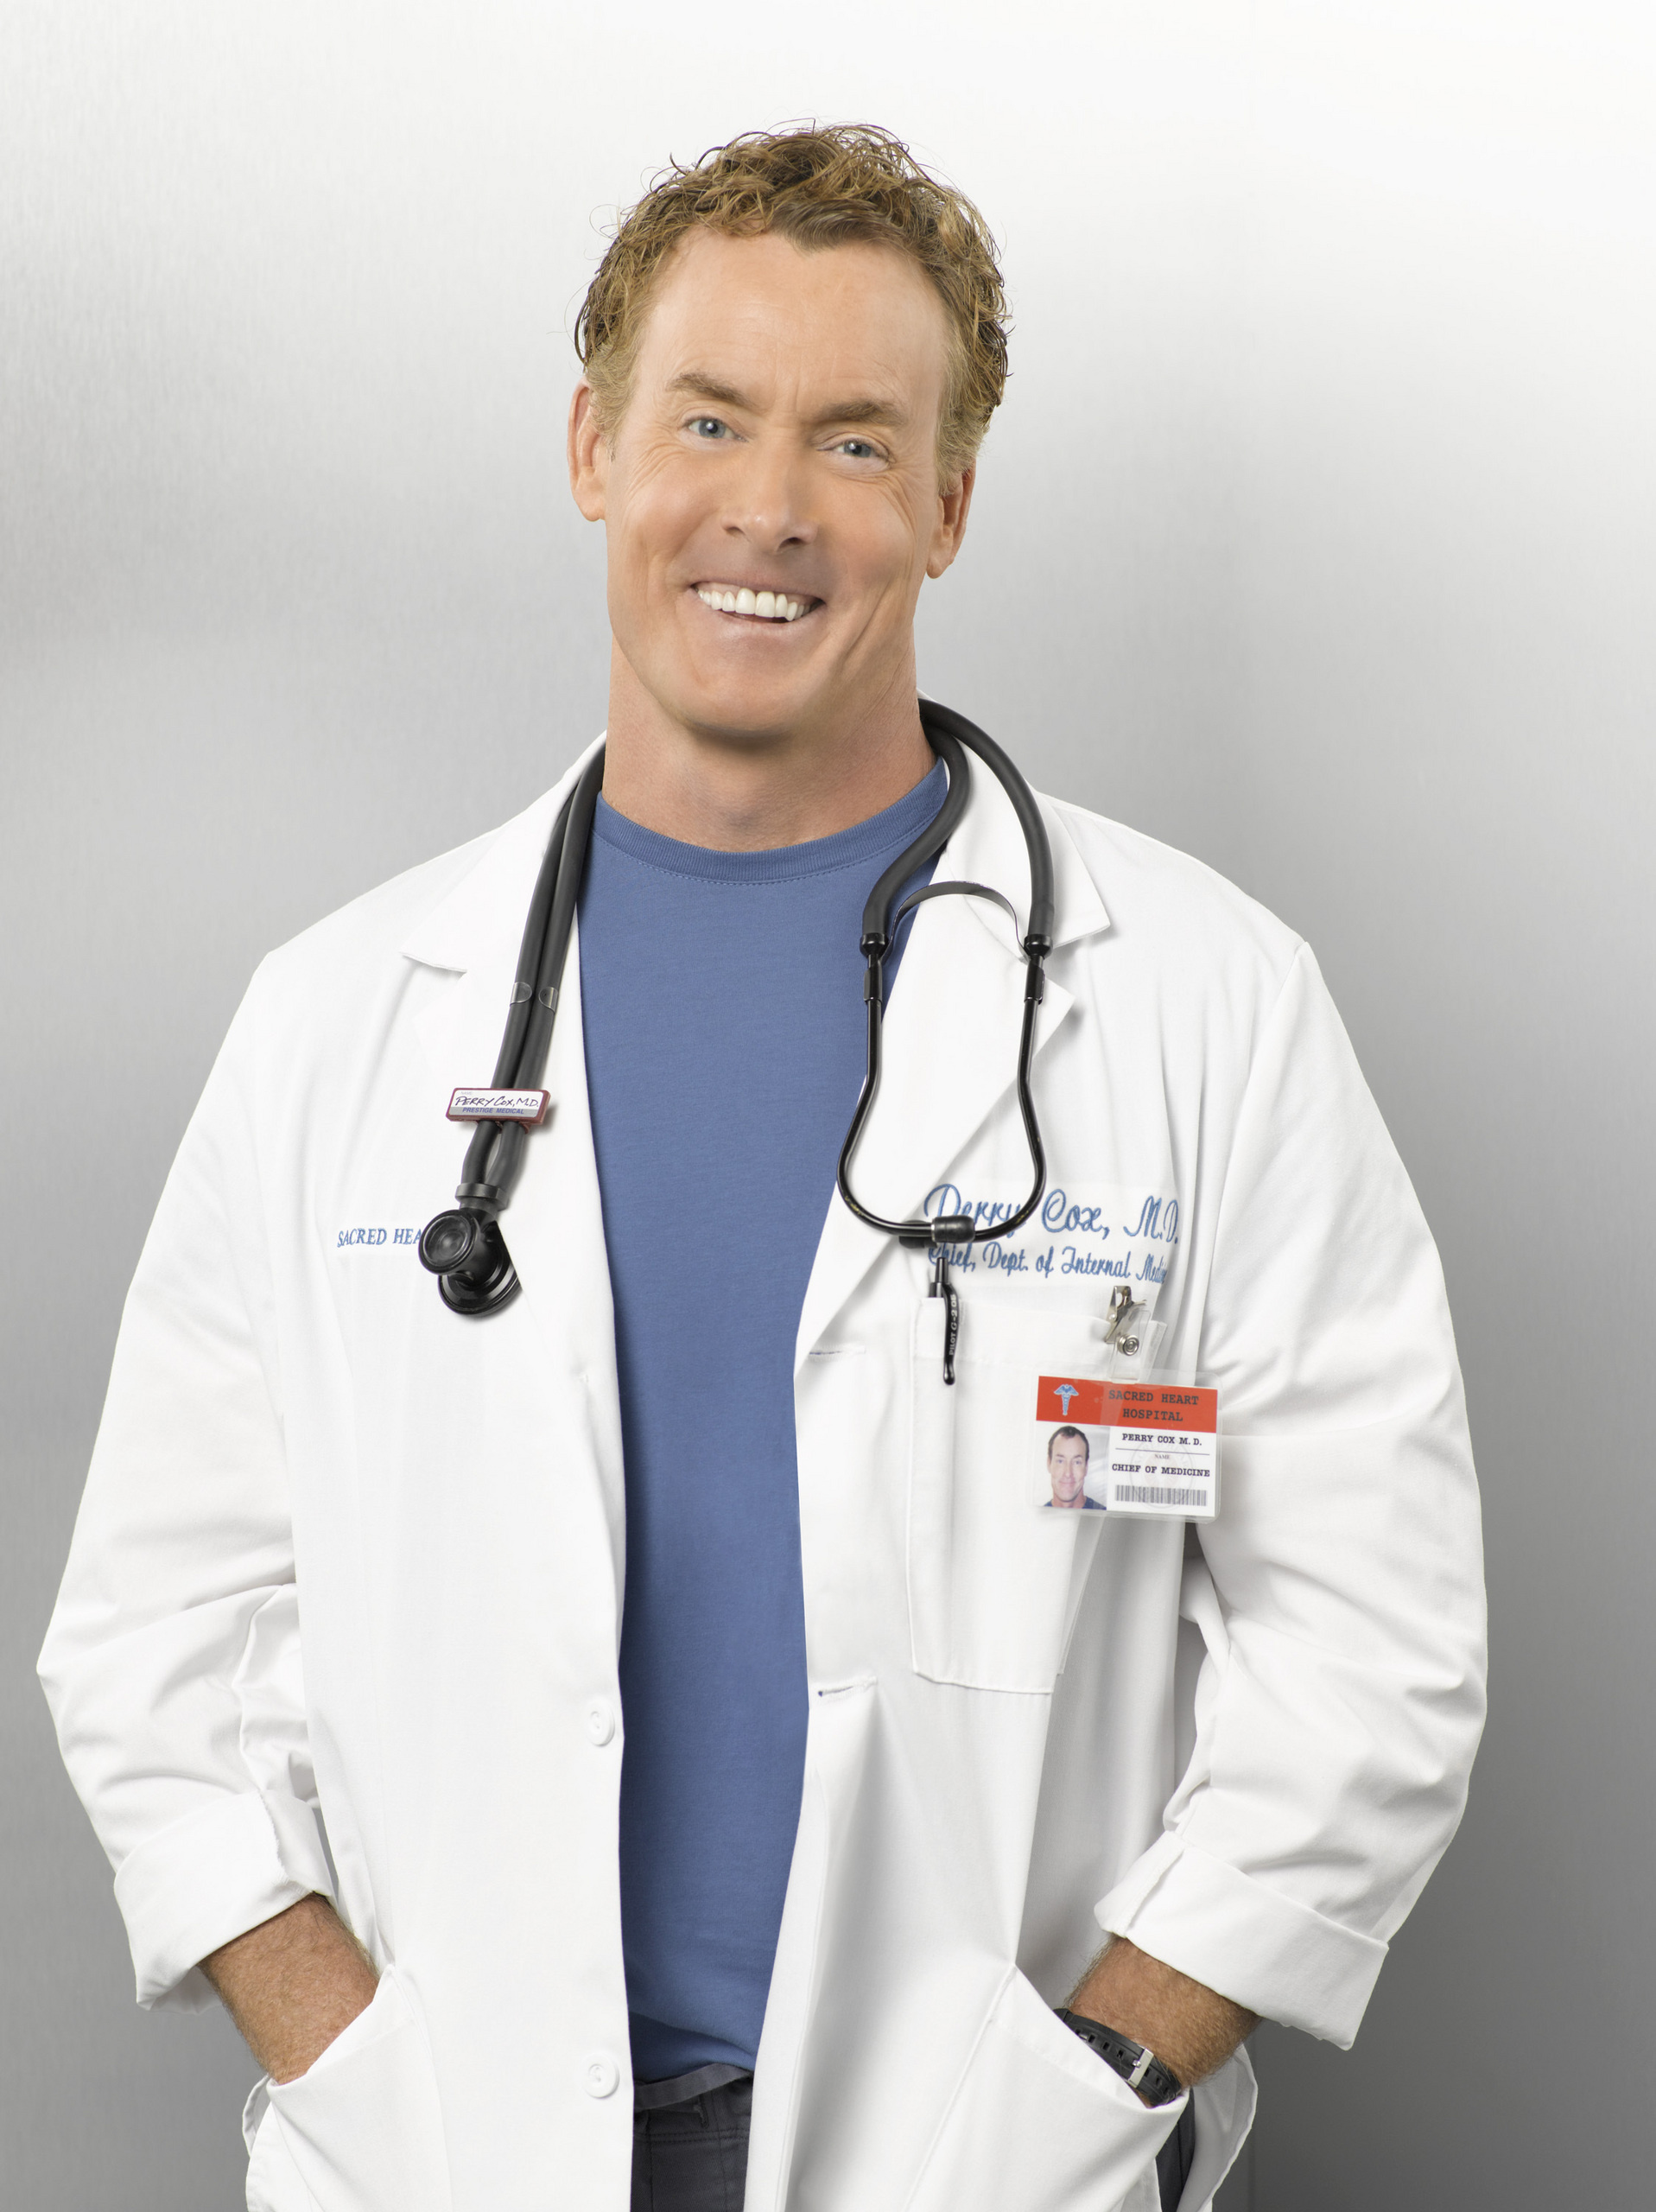 John C. McGinley: Scrubs, Perry Cox, The Chief of Medicine and Attending Physician at New Sacred Heart Hospital. 1920x2560 HD Wallpaper.